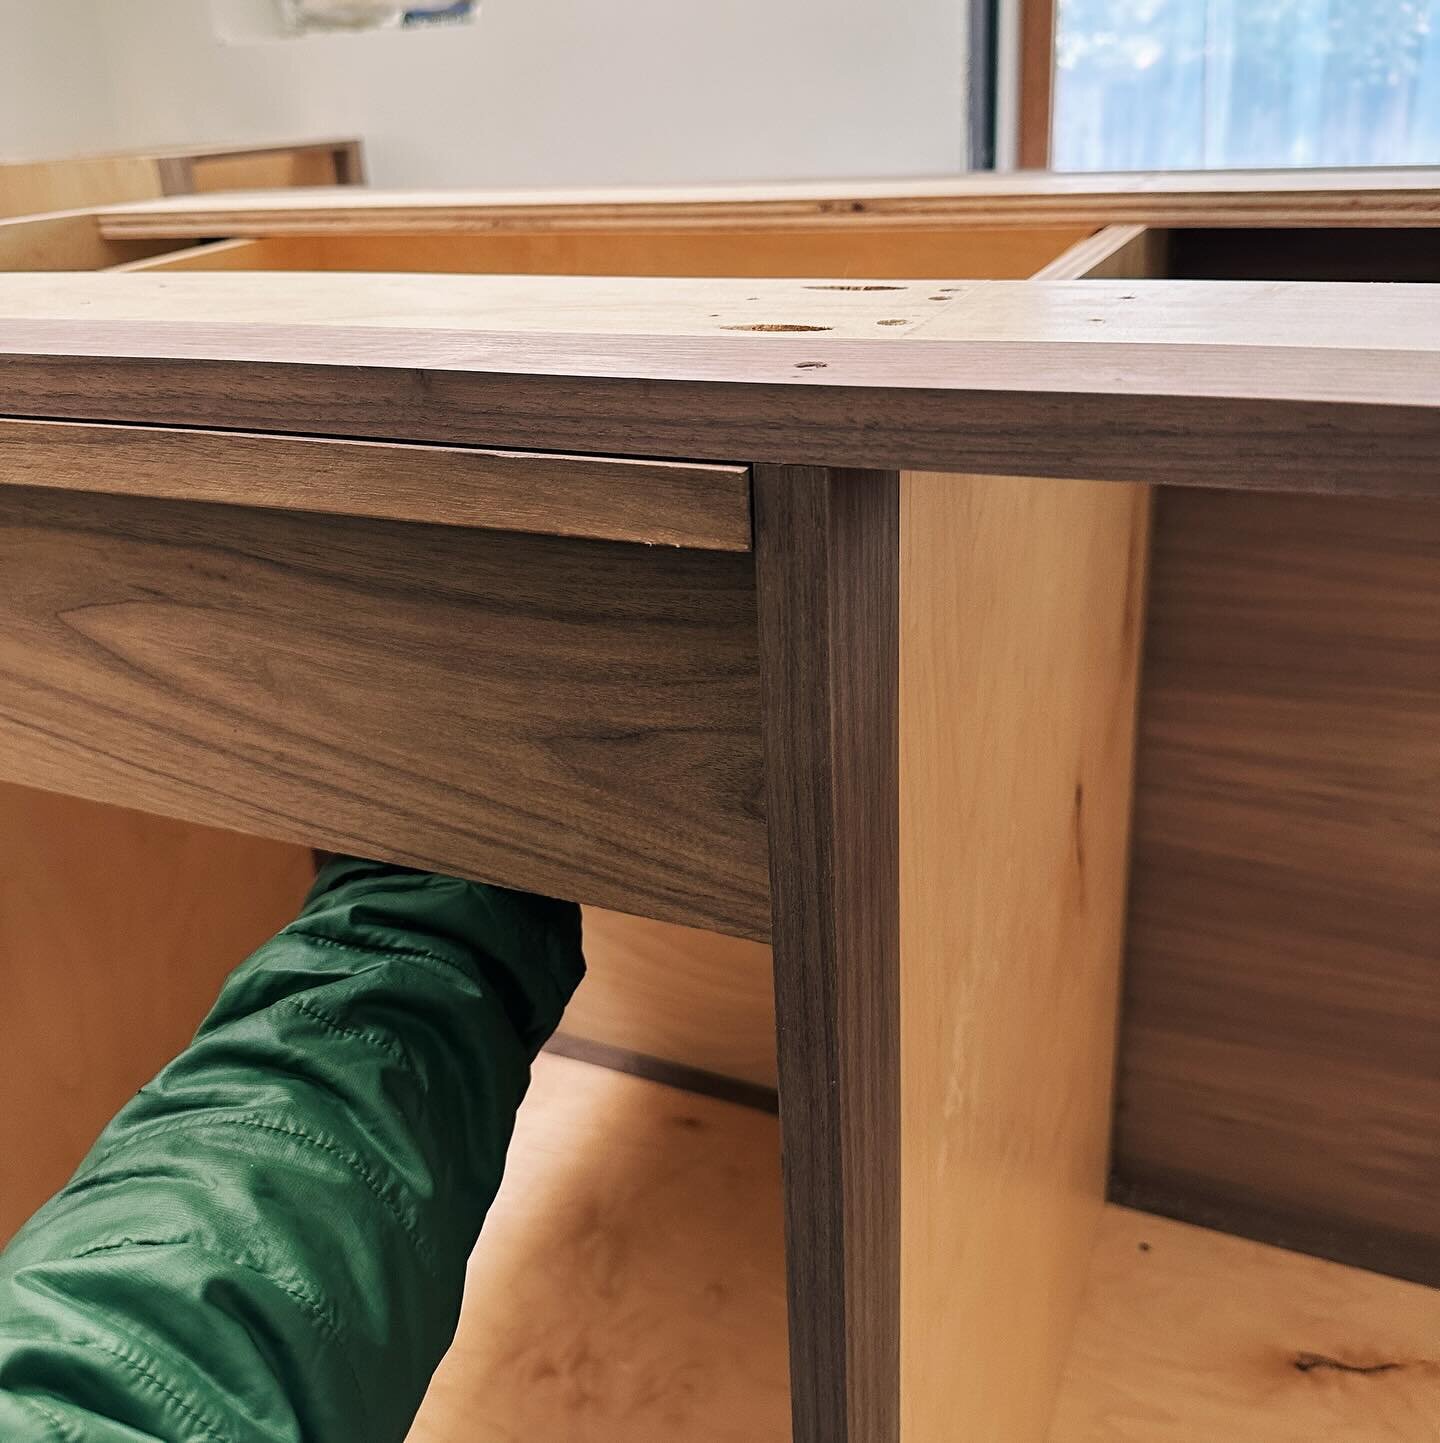 Cabinet boxes installed.
Drawers with custom built-in pulls on site. Excited to see it all together.
.
.
.

#custombuild 
#customcabinet 
#homedesign 
#singlefamilyhome 
#napadesign